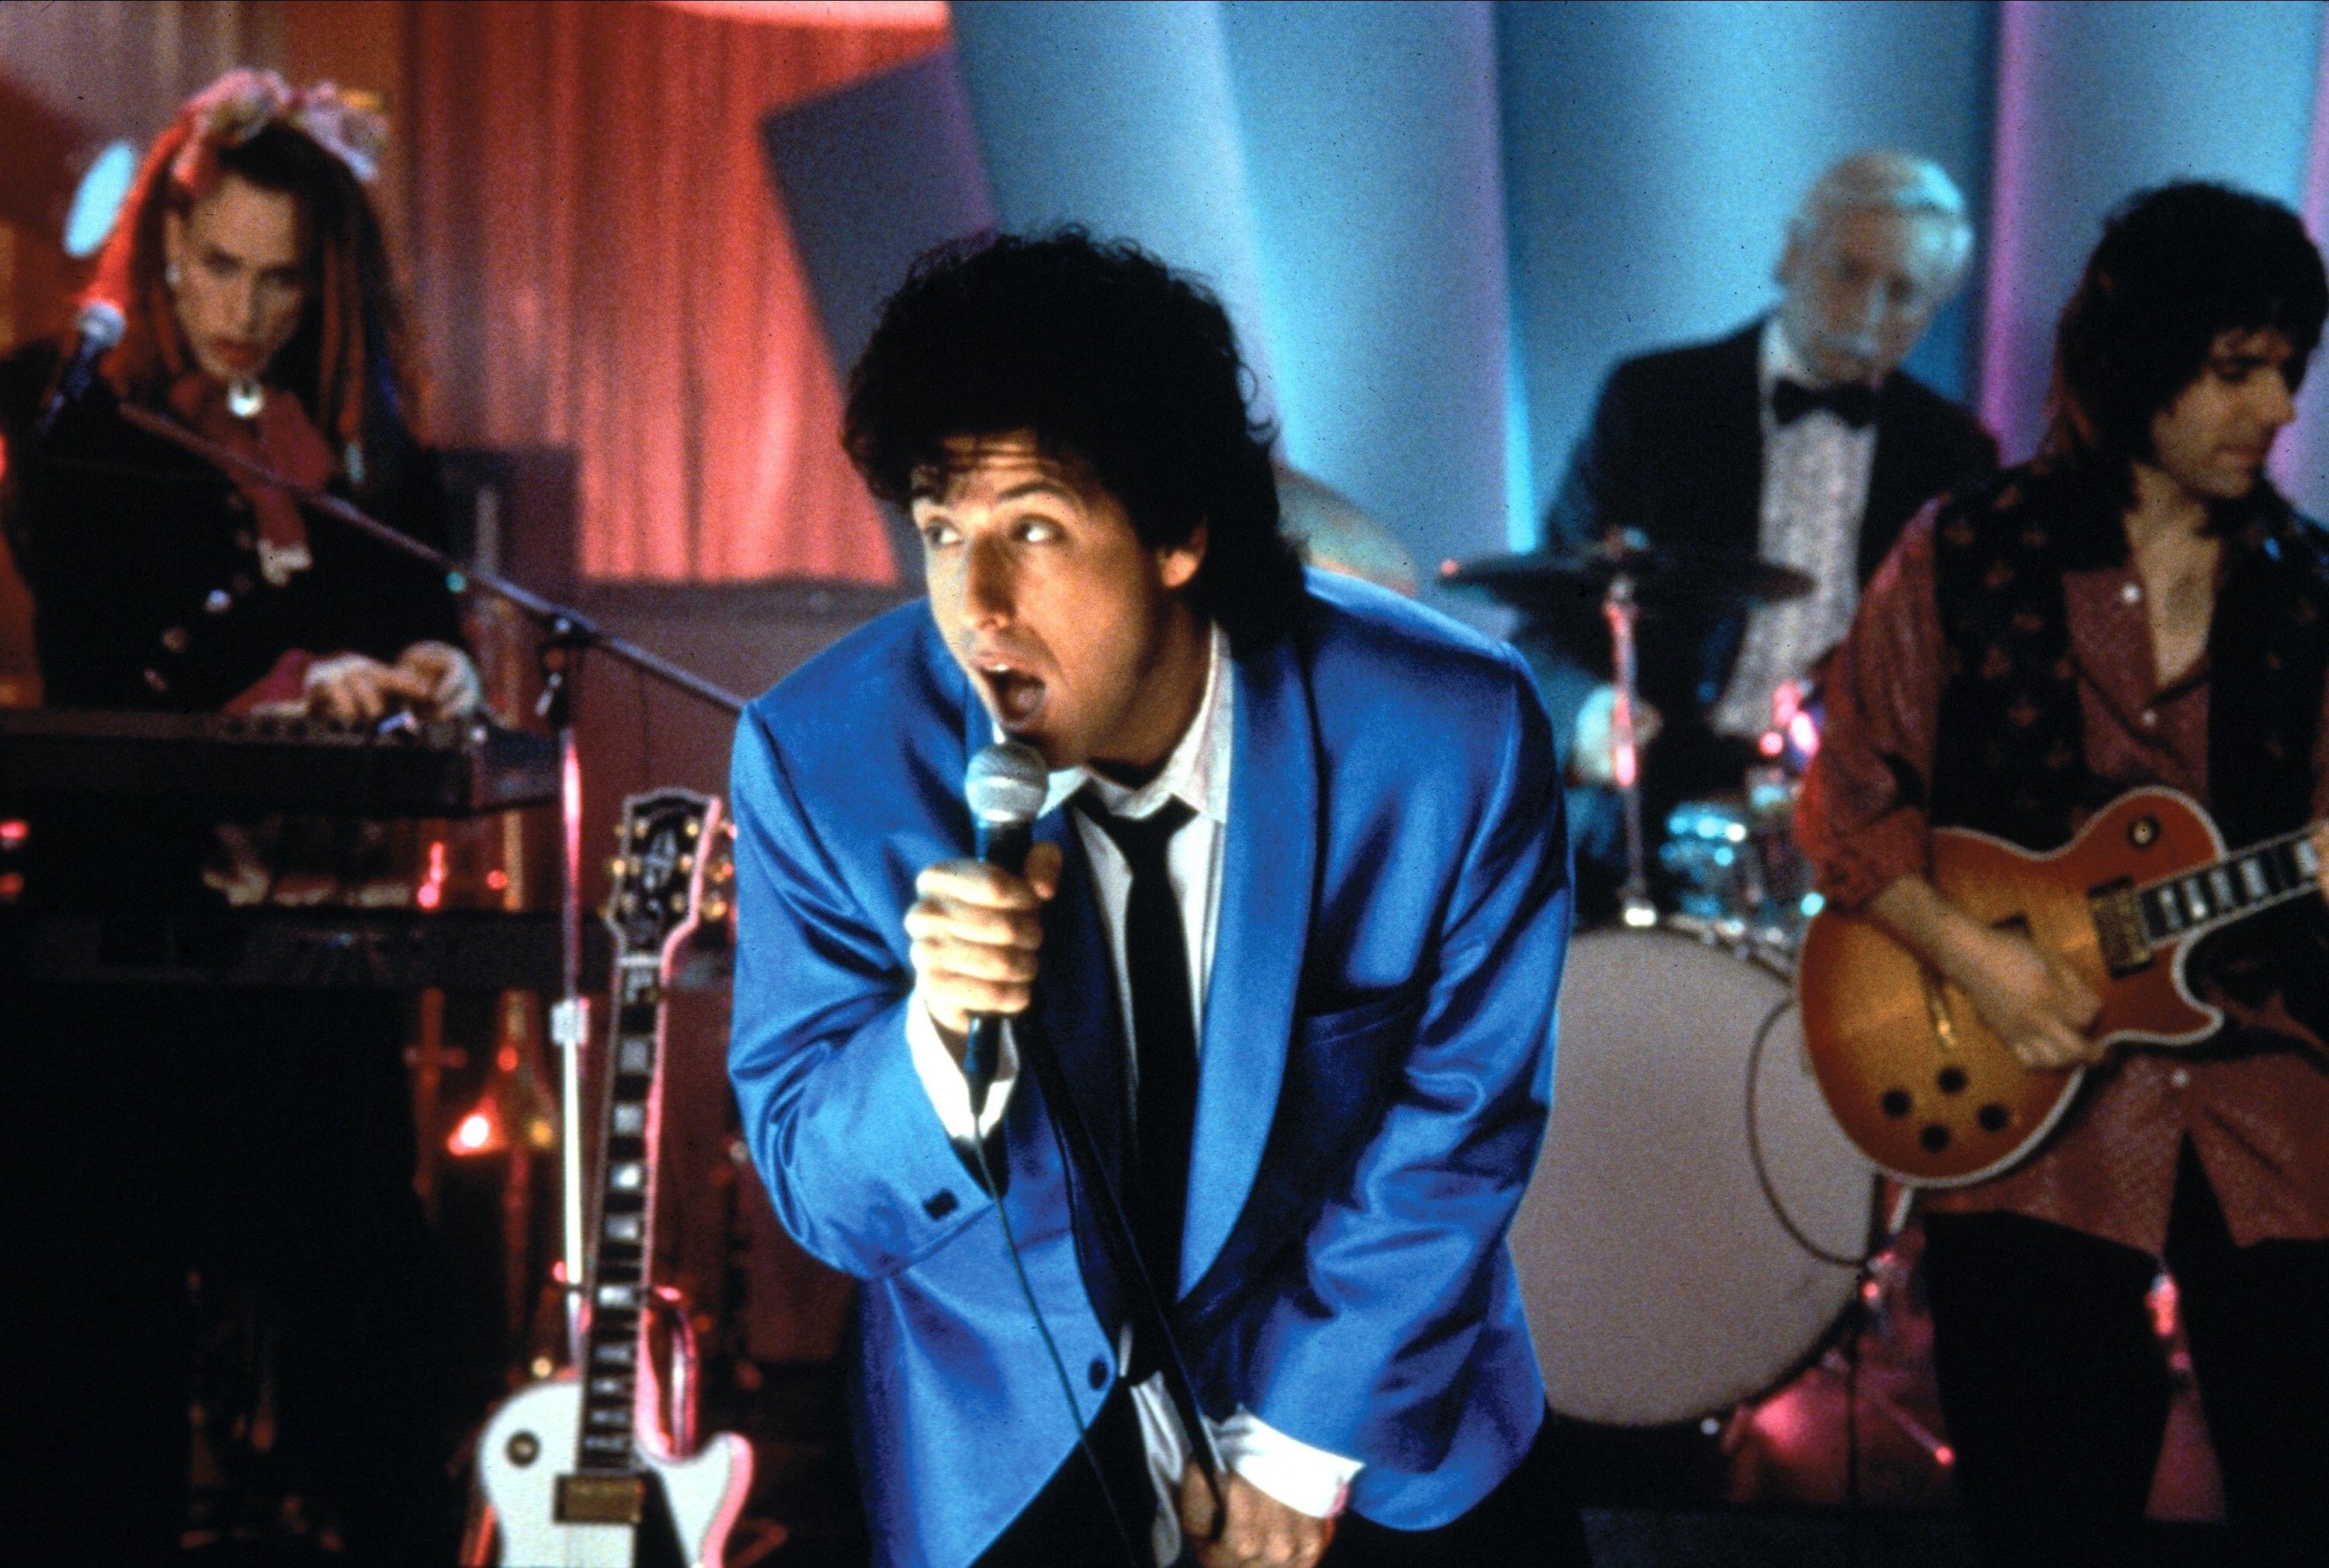 Adam Sandler on stage in a suit and performing in The Wedding Singer